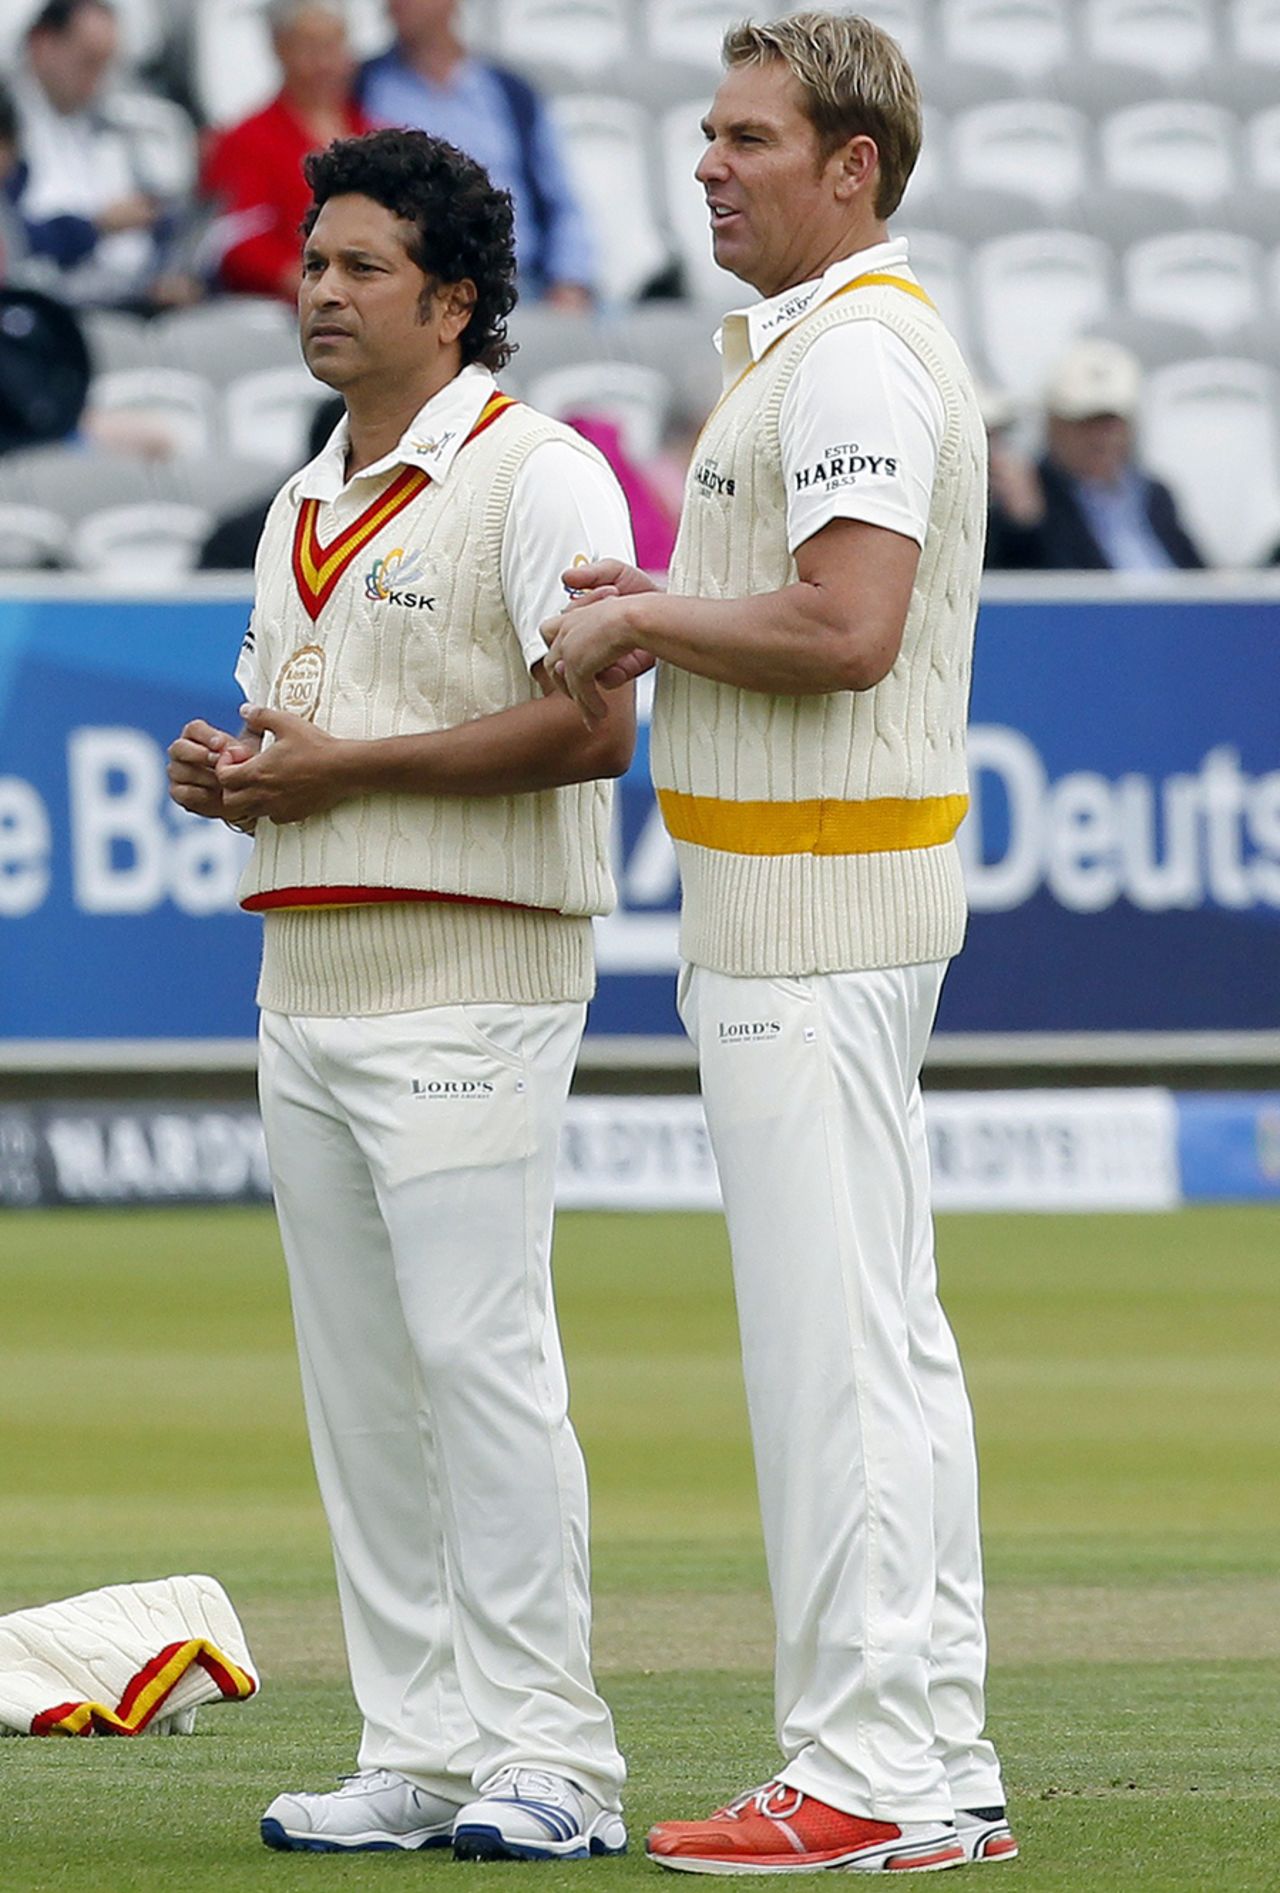 Sachin Tendulkar and Shane Warne have a chat during the MCC v Rest of the World game at Lord's, July 5, 2014